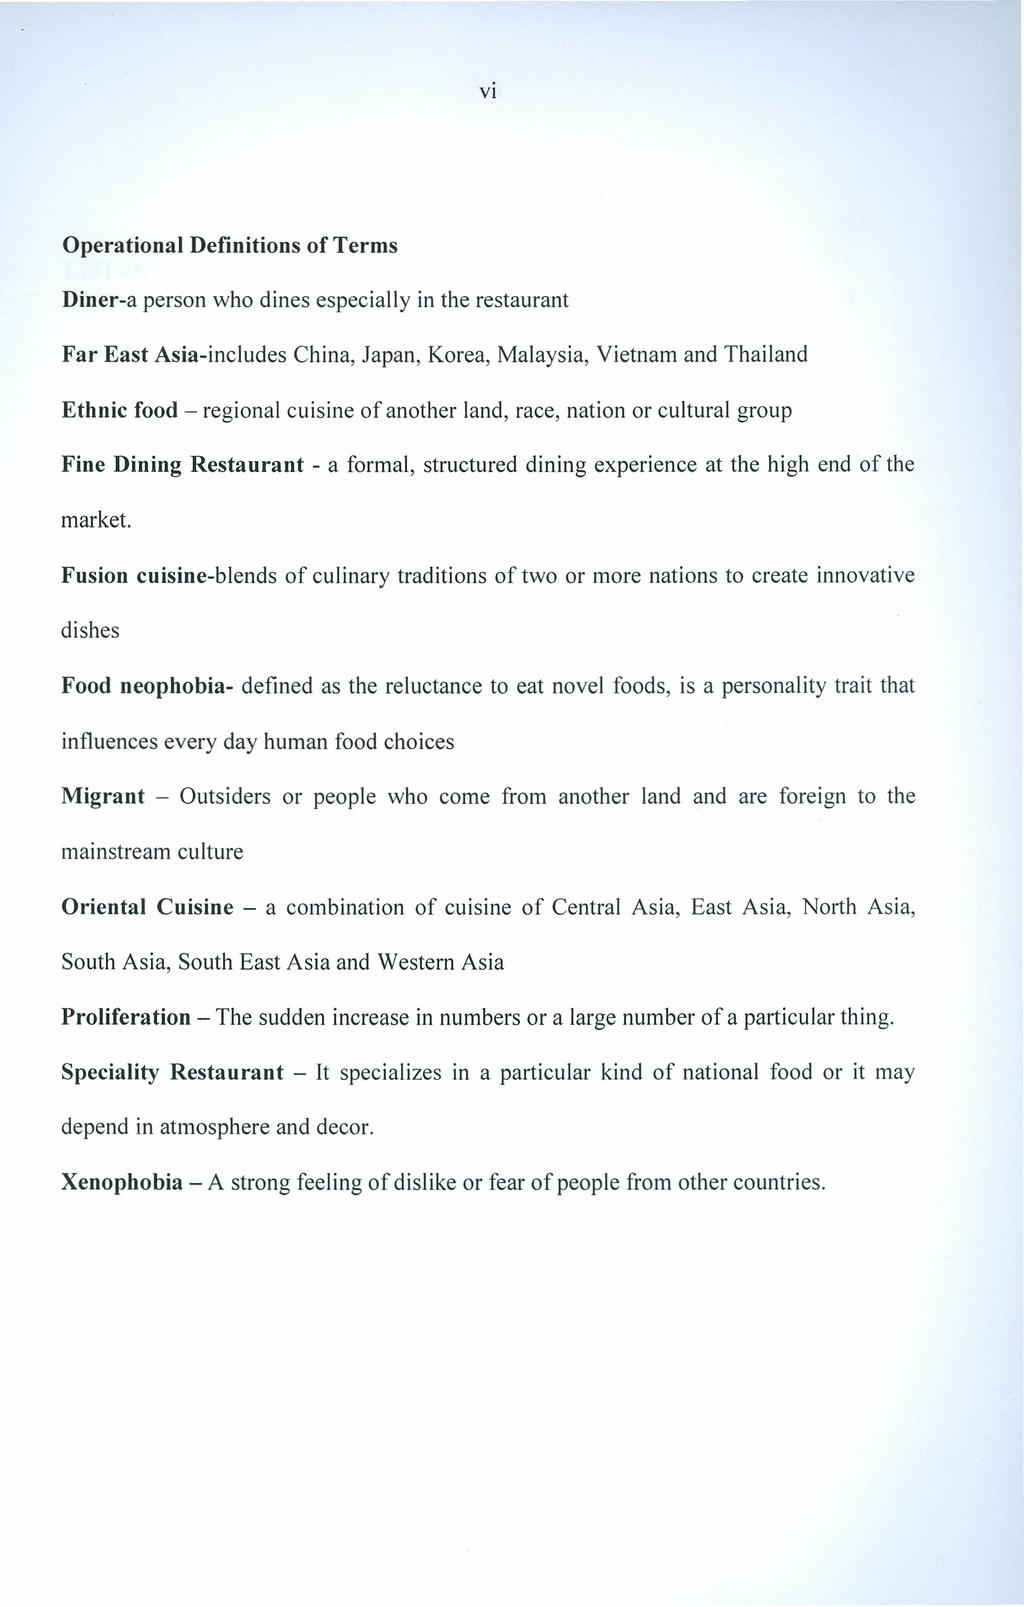 VI Operational Definitions of Terms Diner-a person who dines especially in the restaurant Far East Asia-includes China, Japan, Korea, Malaysia, Vietnam and Thailand Ethnic food - regional cuisine of